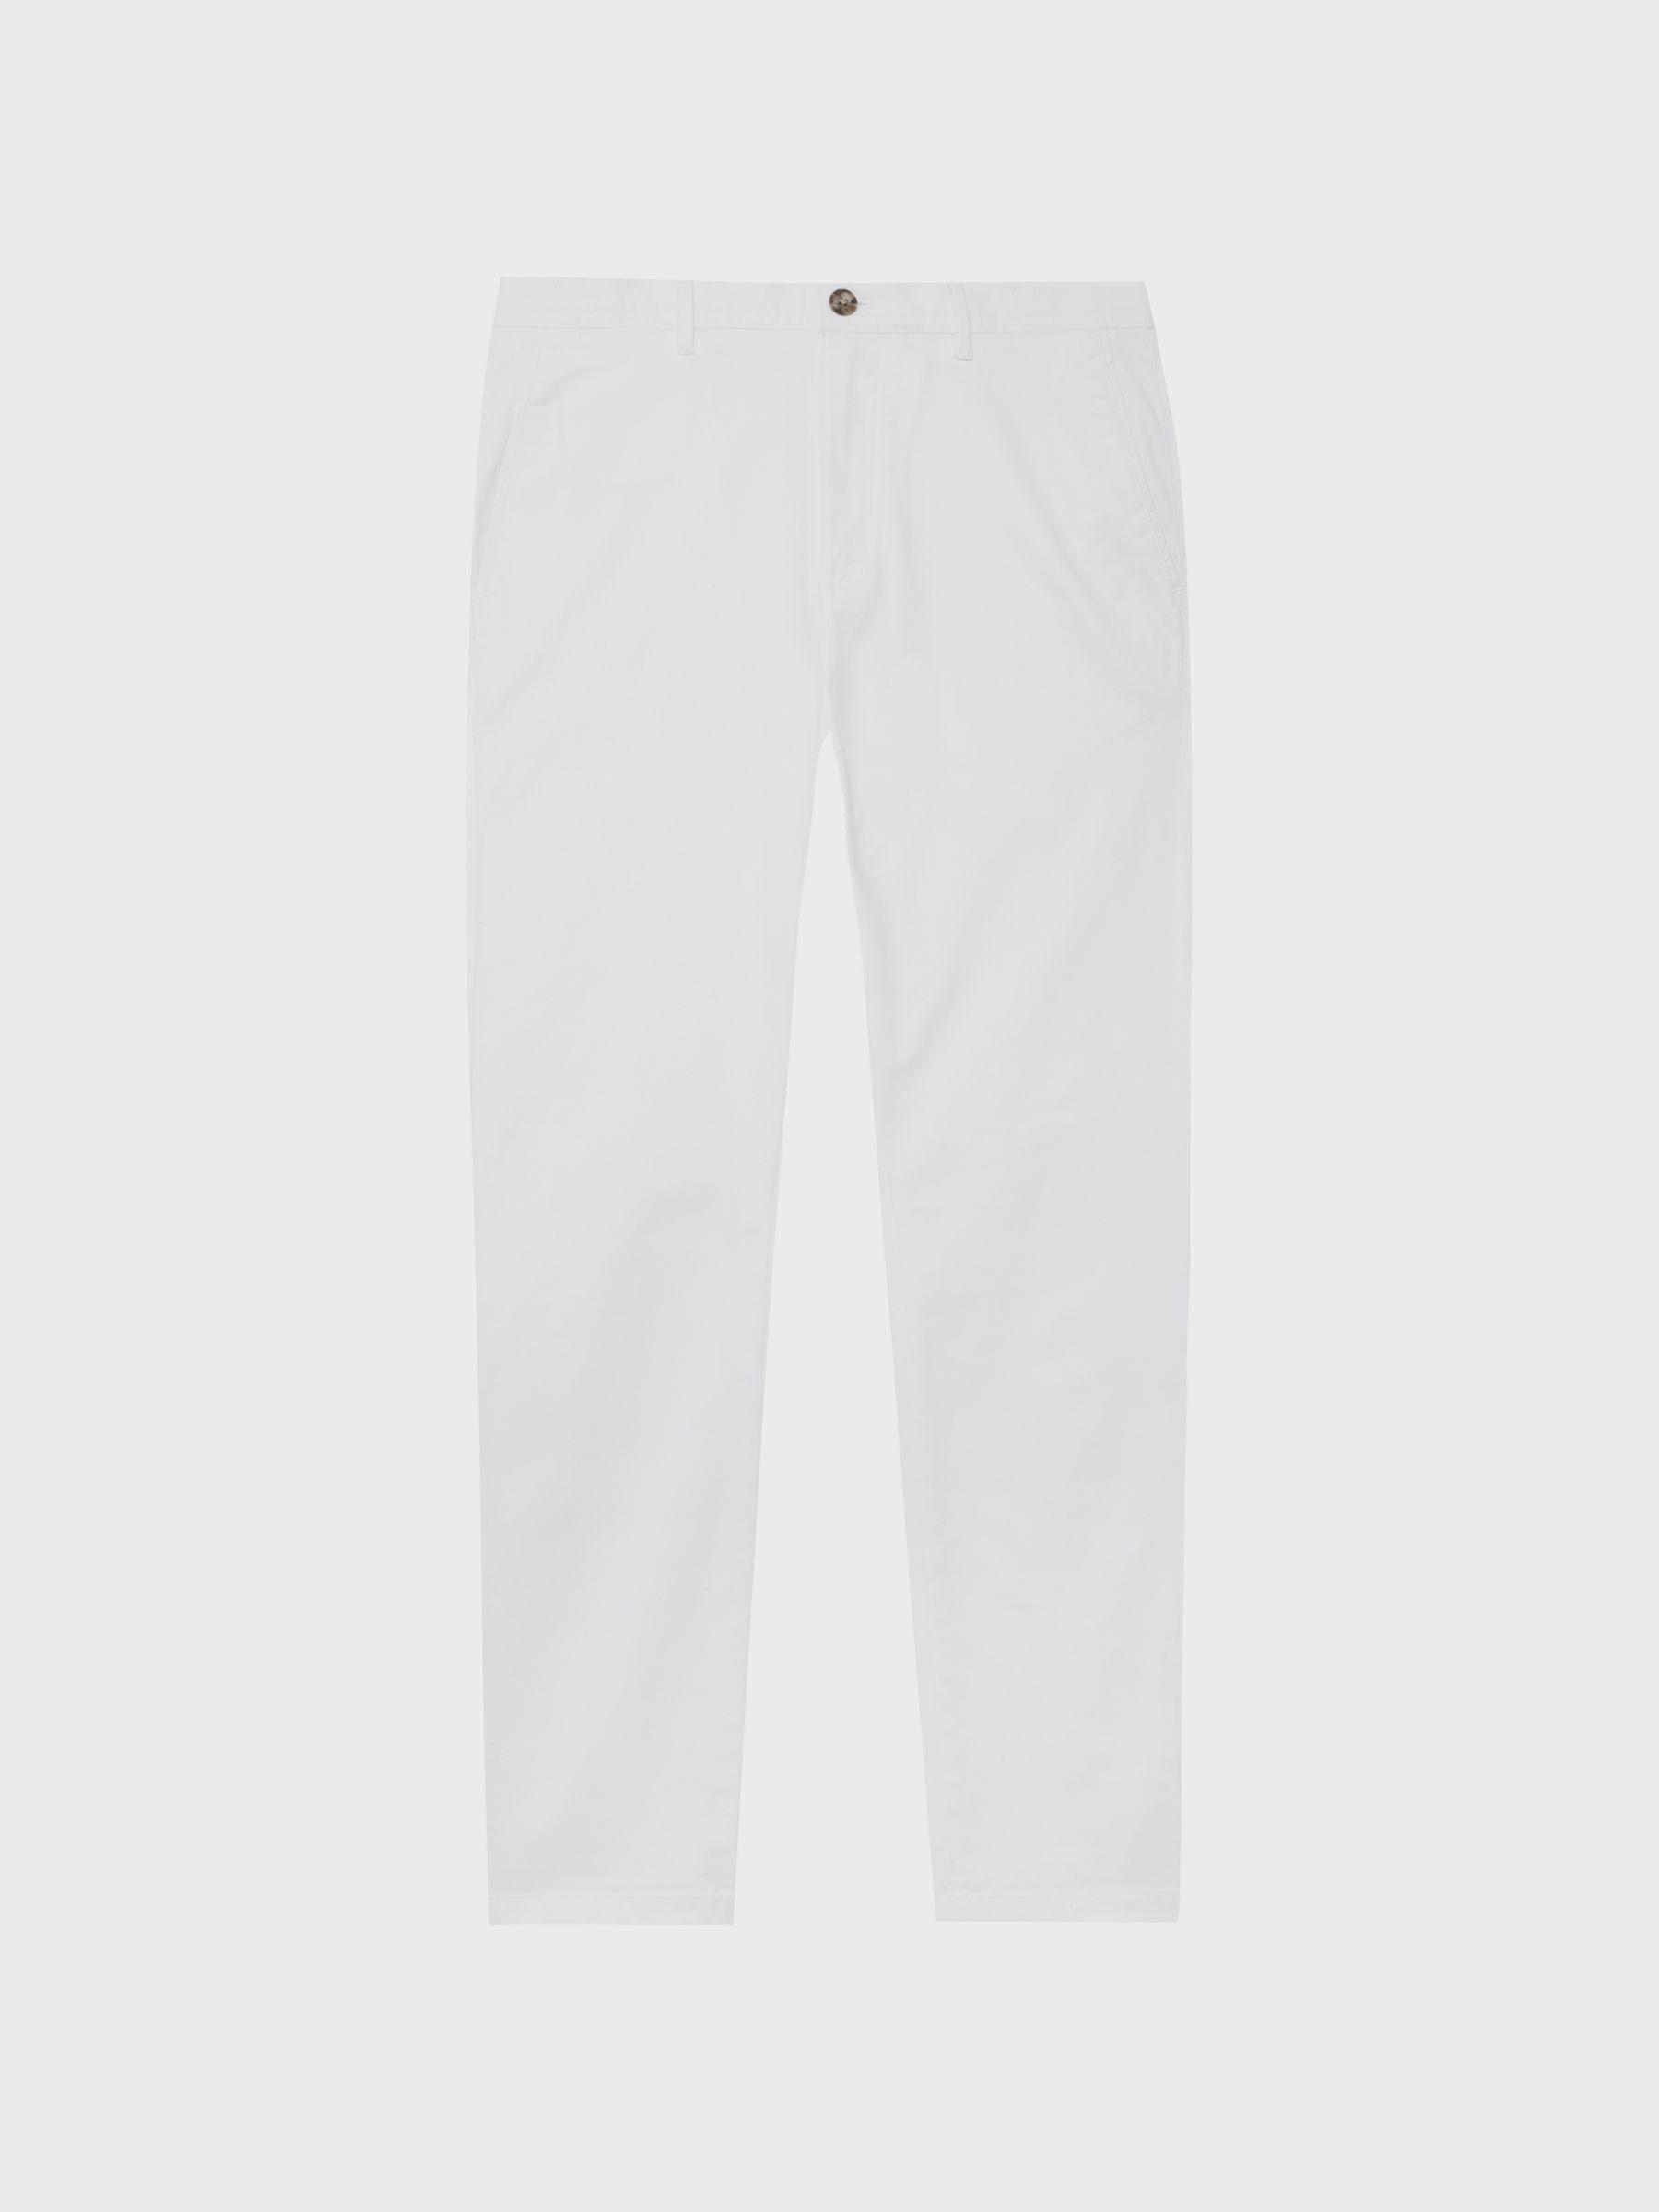 Reiss Pitch Slim Fit Washed Cotton Blend Chinos - REISS